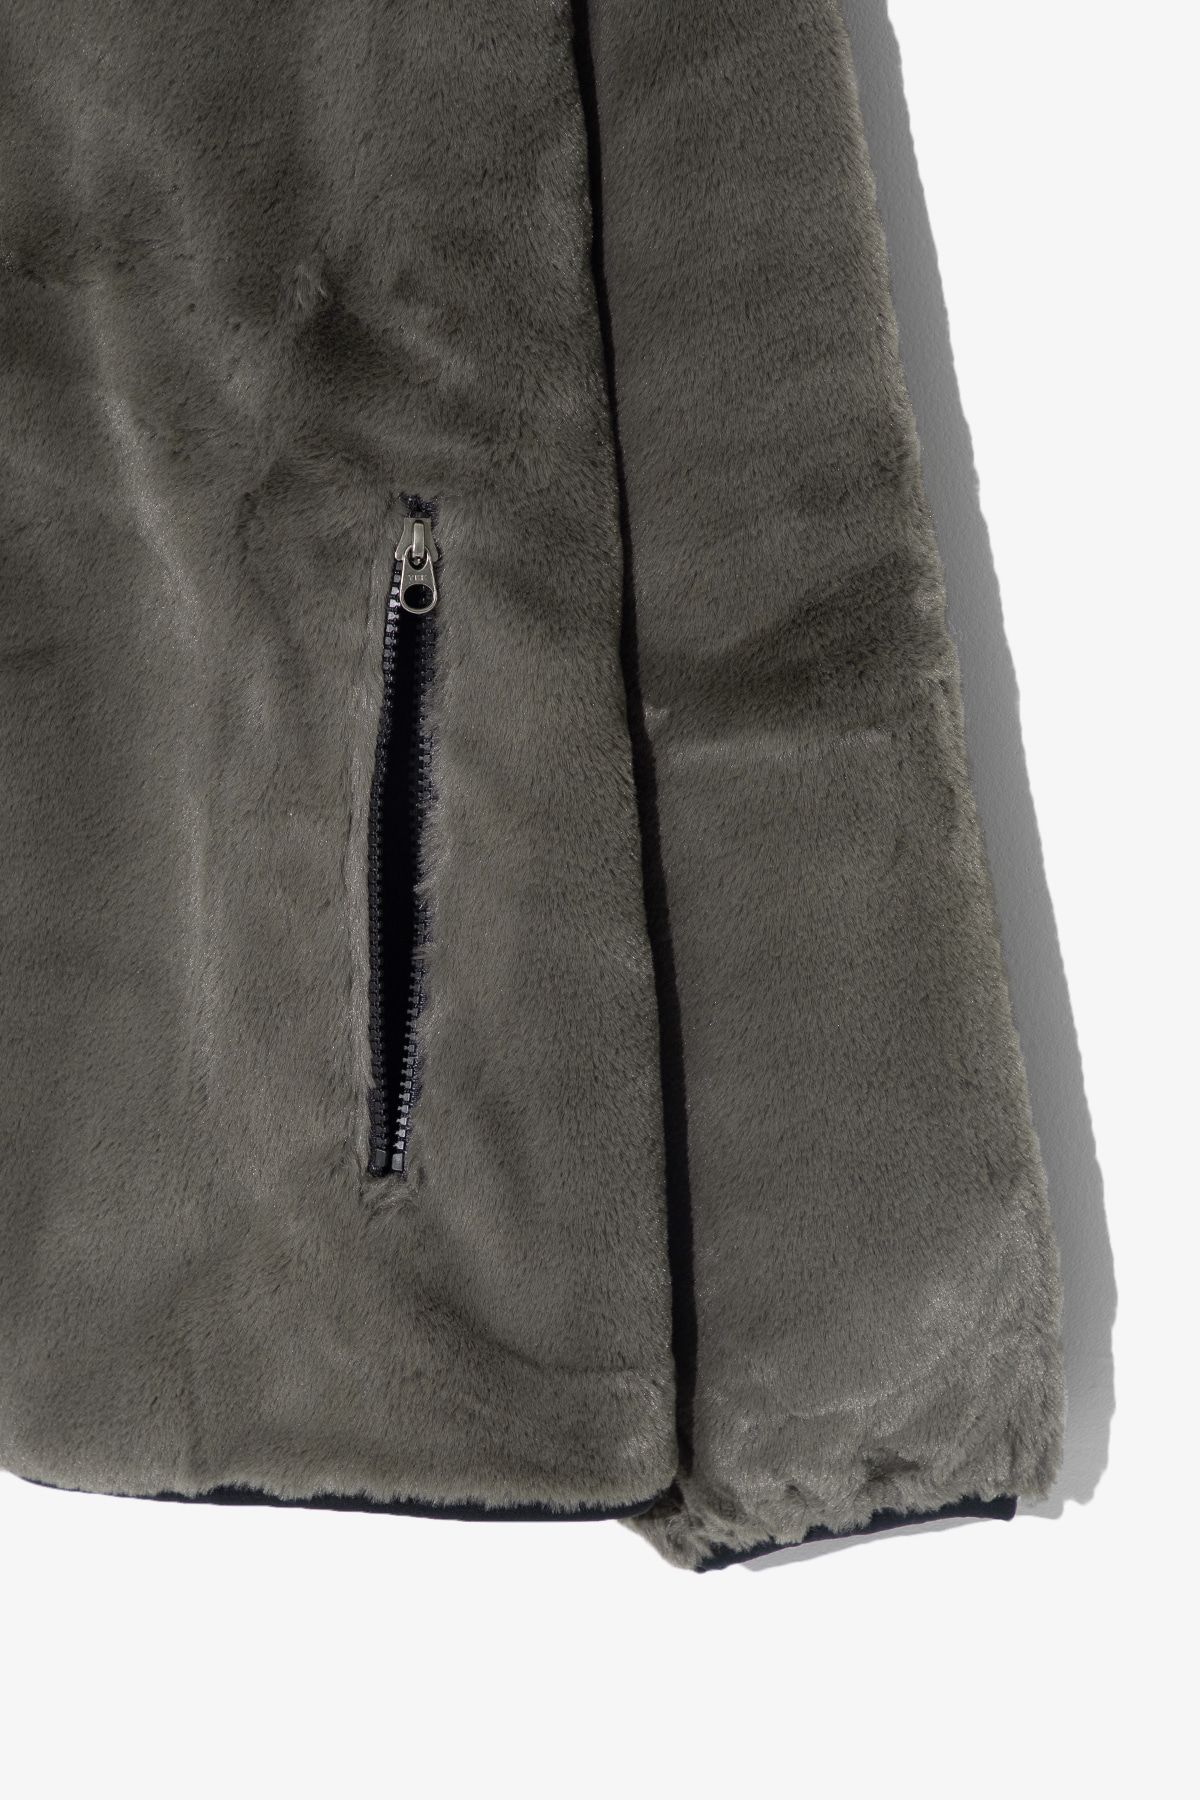 SOUTH2 WEST8 : PIPING JACKET-MICRO FUR (CHARCOAL)